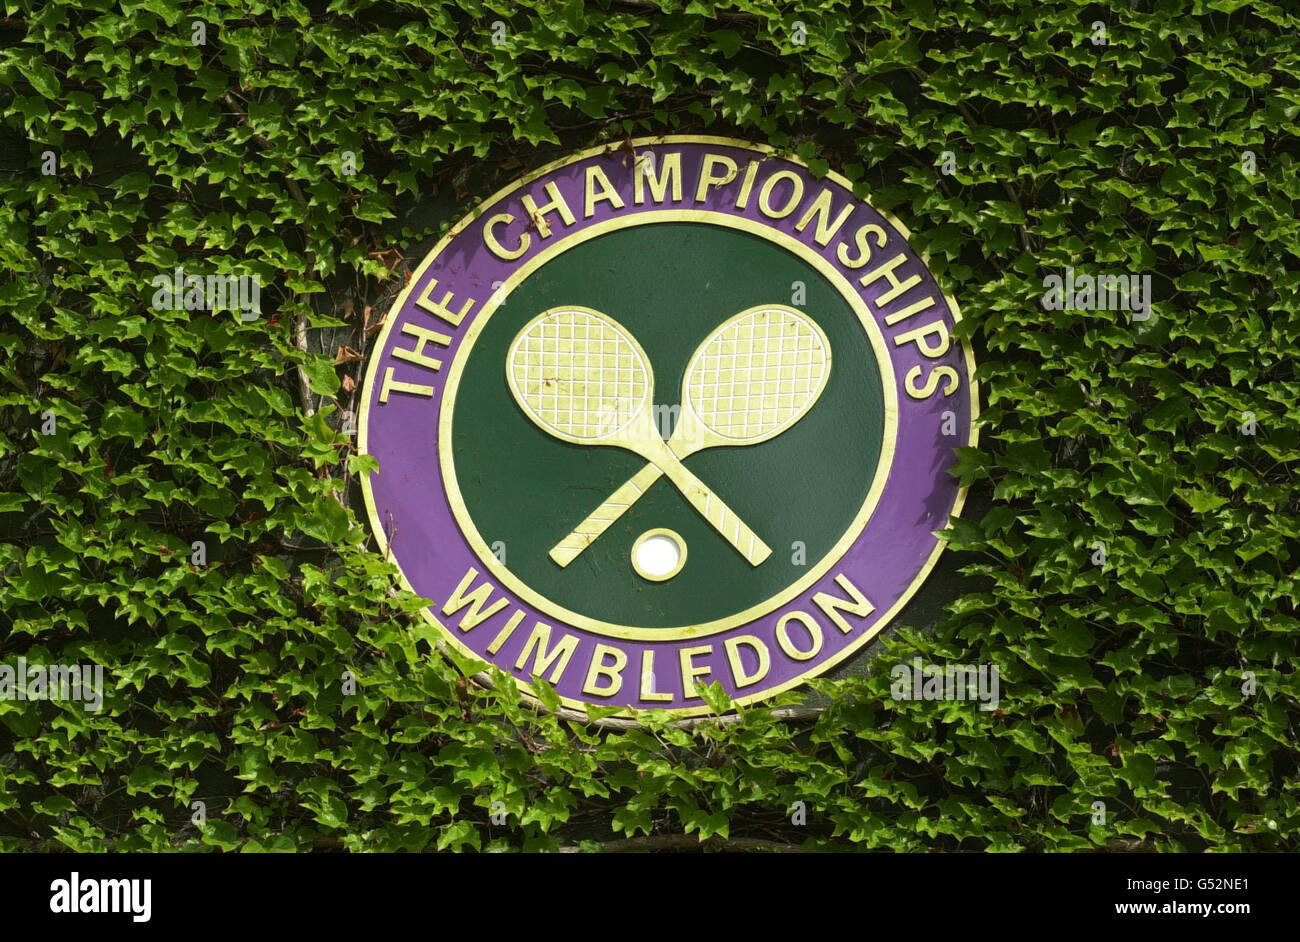 NO COMMERCIAL USE: The Wimbledon Tennis Championships logo. Stock Photo